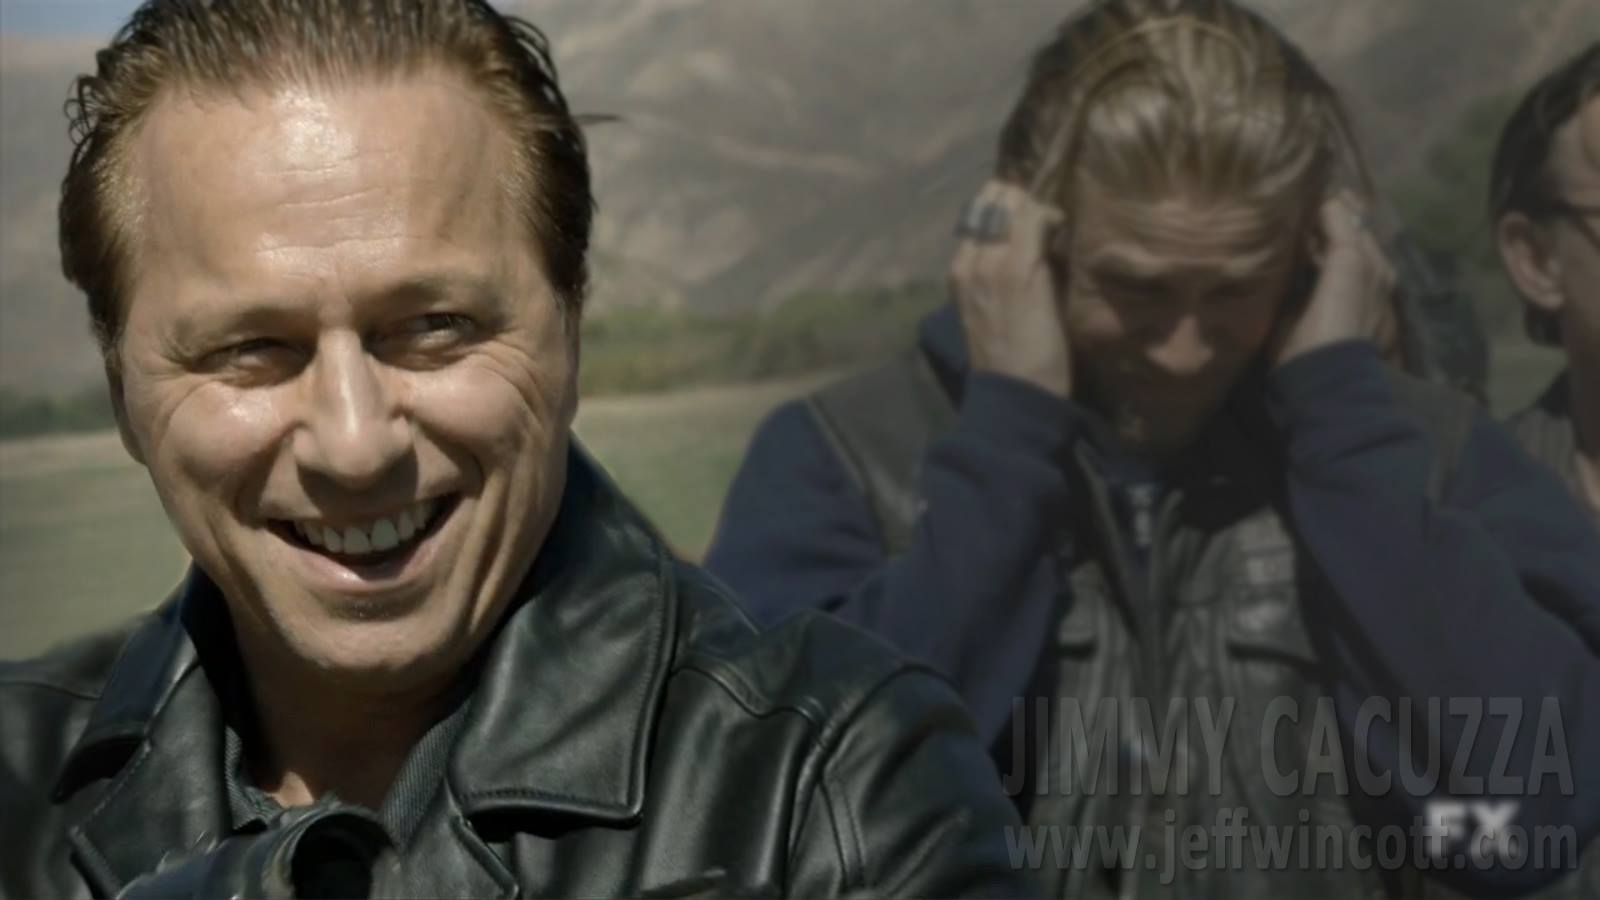 Still of Charlie Hunnan and Jeff Wincott as Jimmy Cacuzza in Sons Of Anarchy (2013)